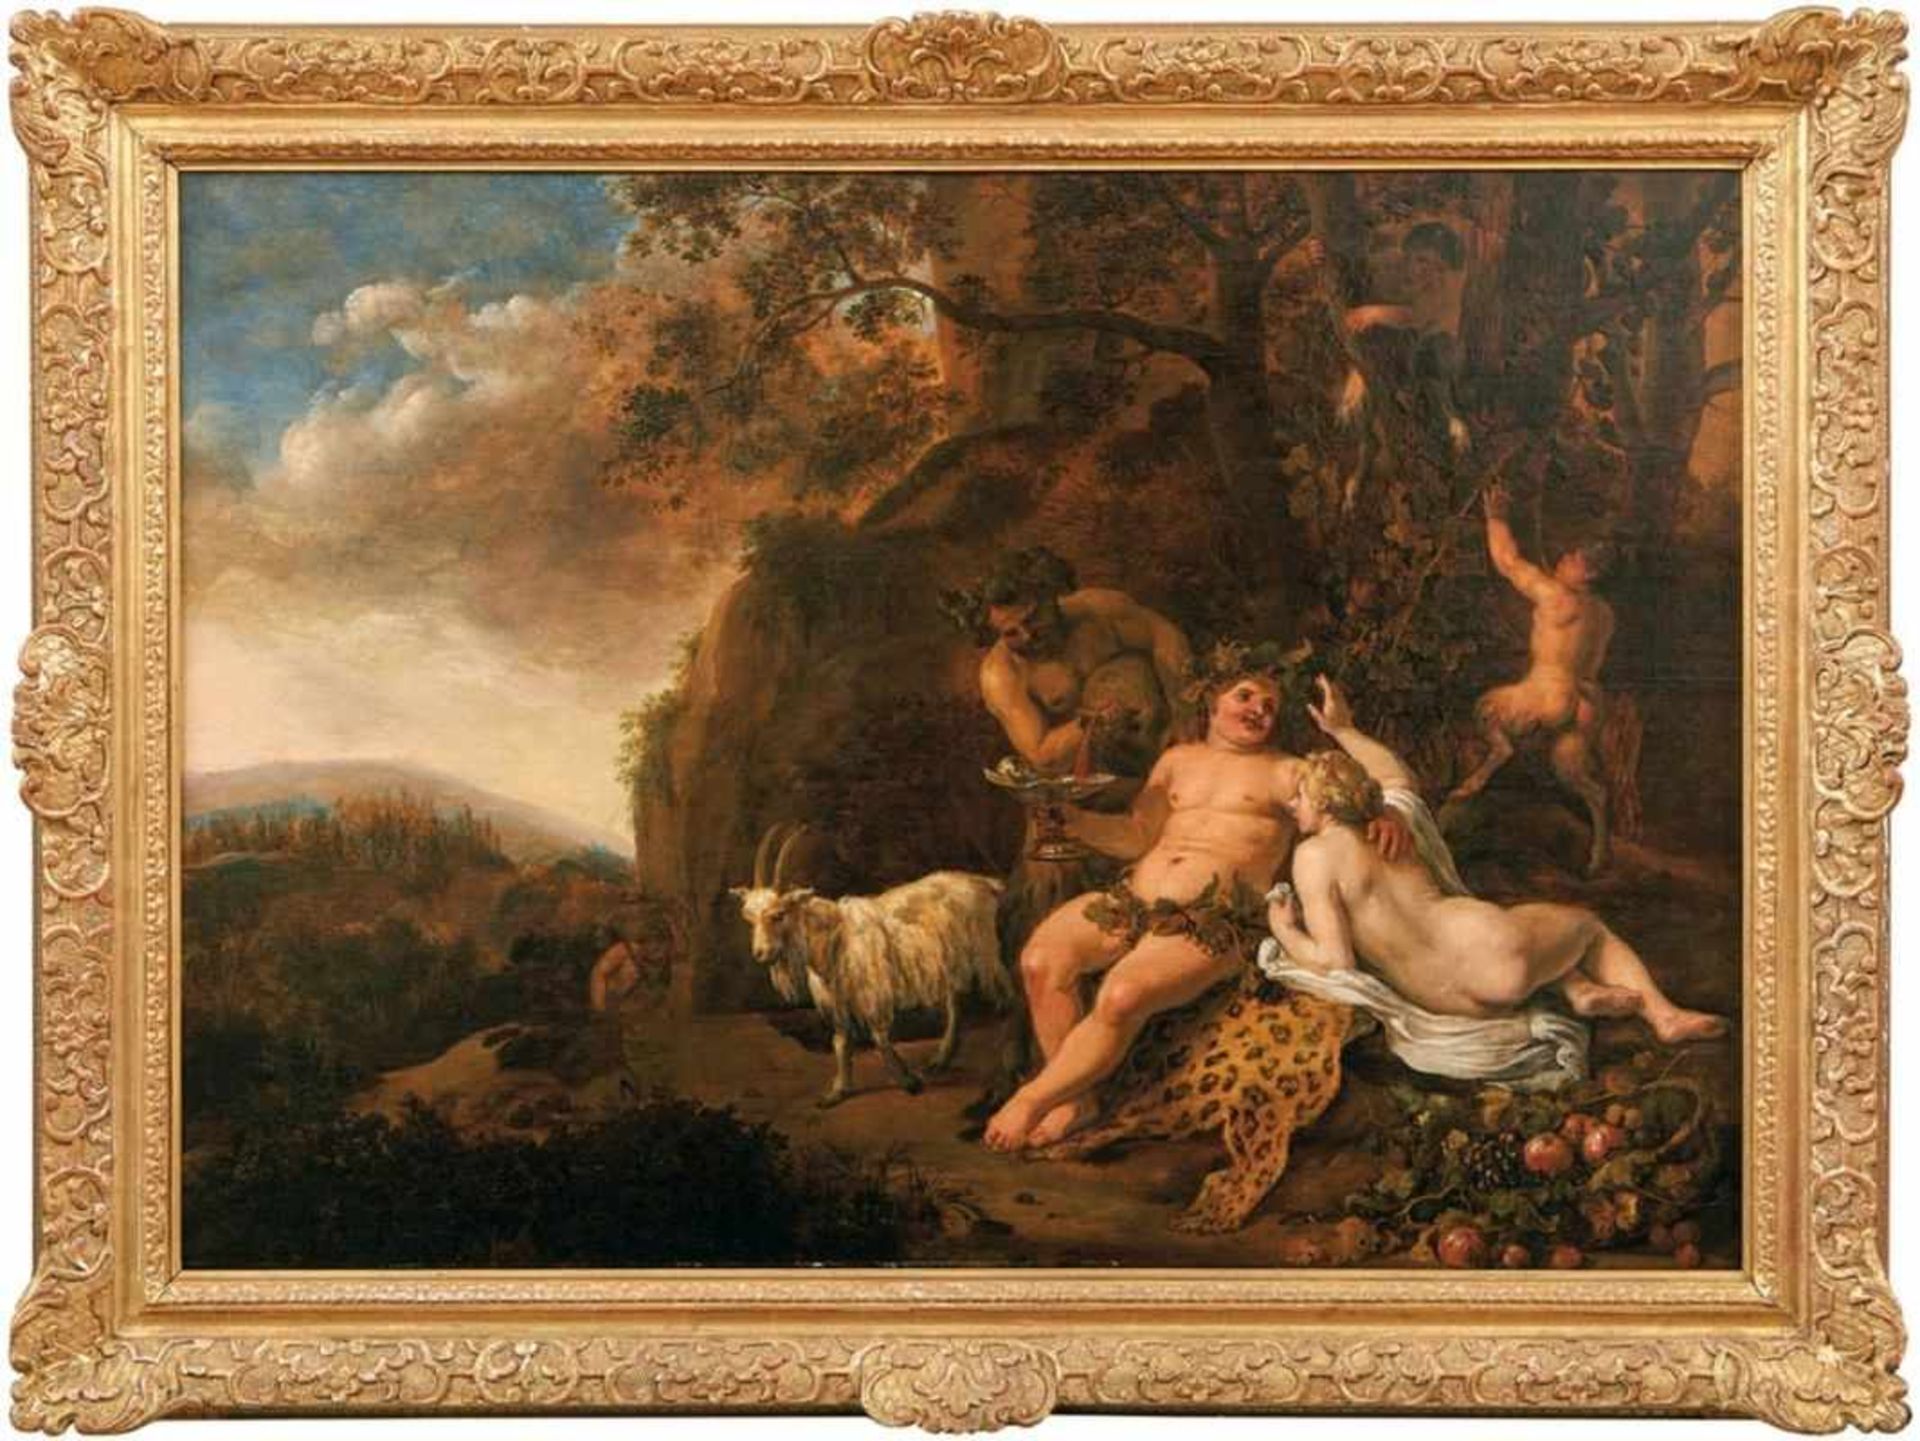 Bacchus and AriadneFlemish master of the 17th centuryA small feast on a hill sheltered by rocks with